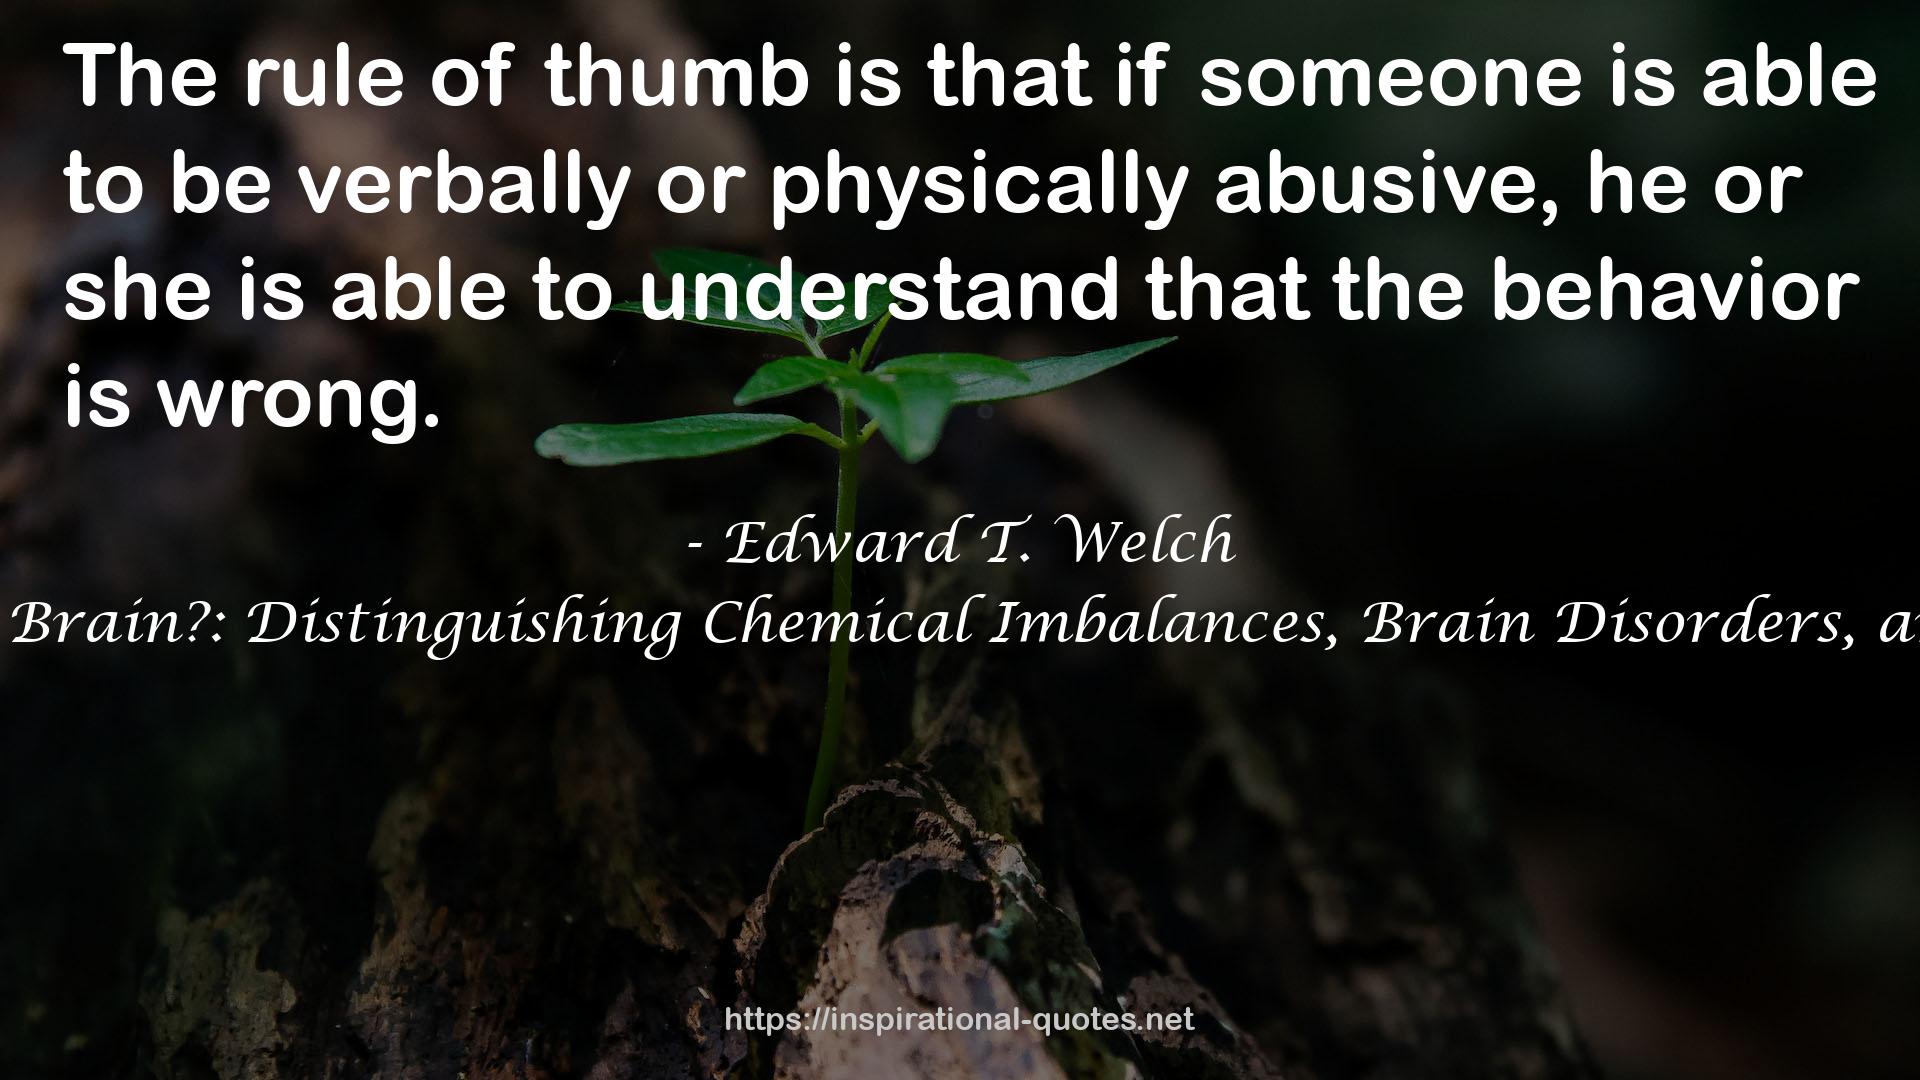 Blame It on the Brain?: Distinguishing Chemical Imbalances, Brain Disorders, and Disobedience QUOTES